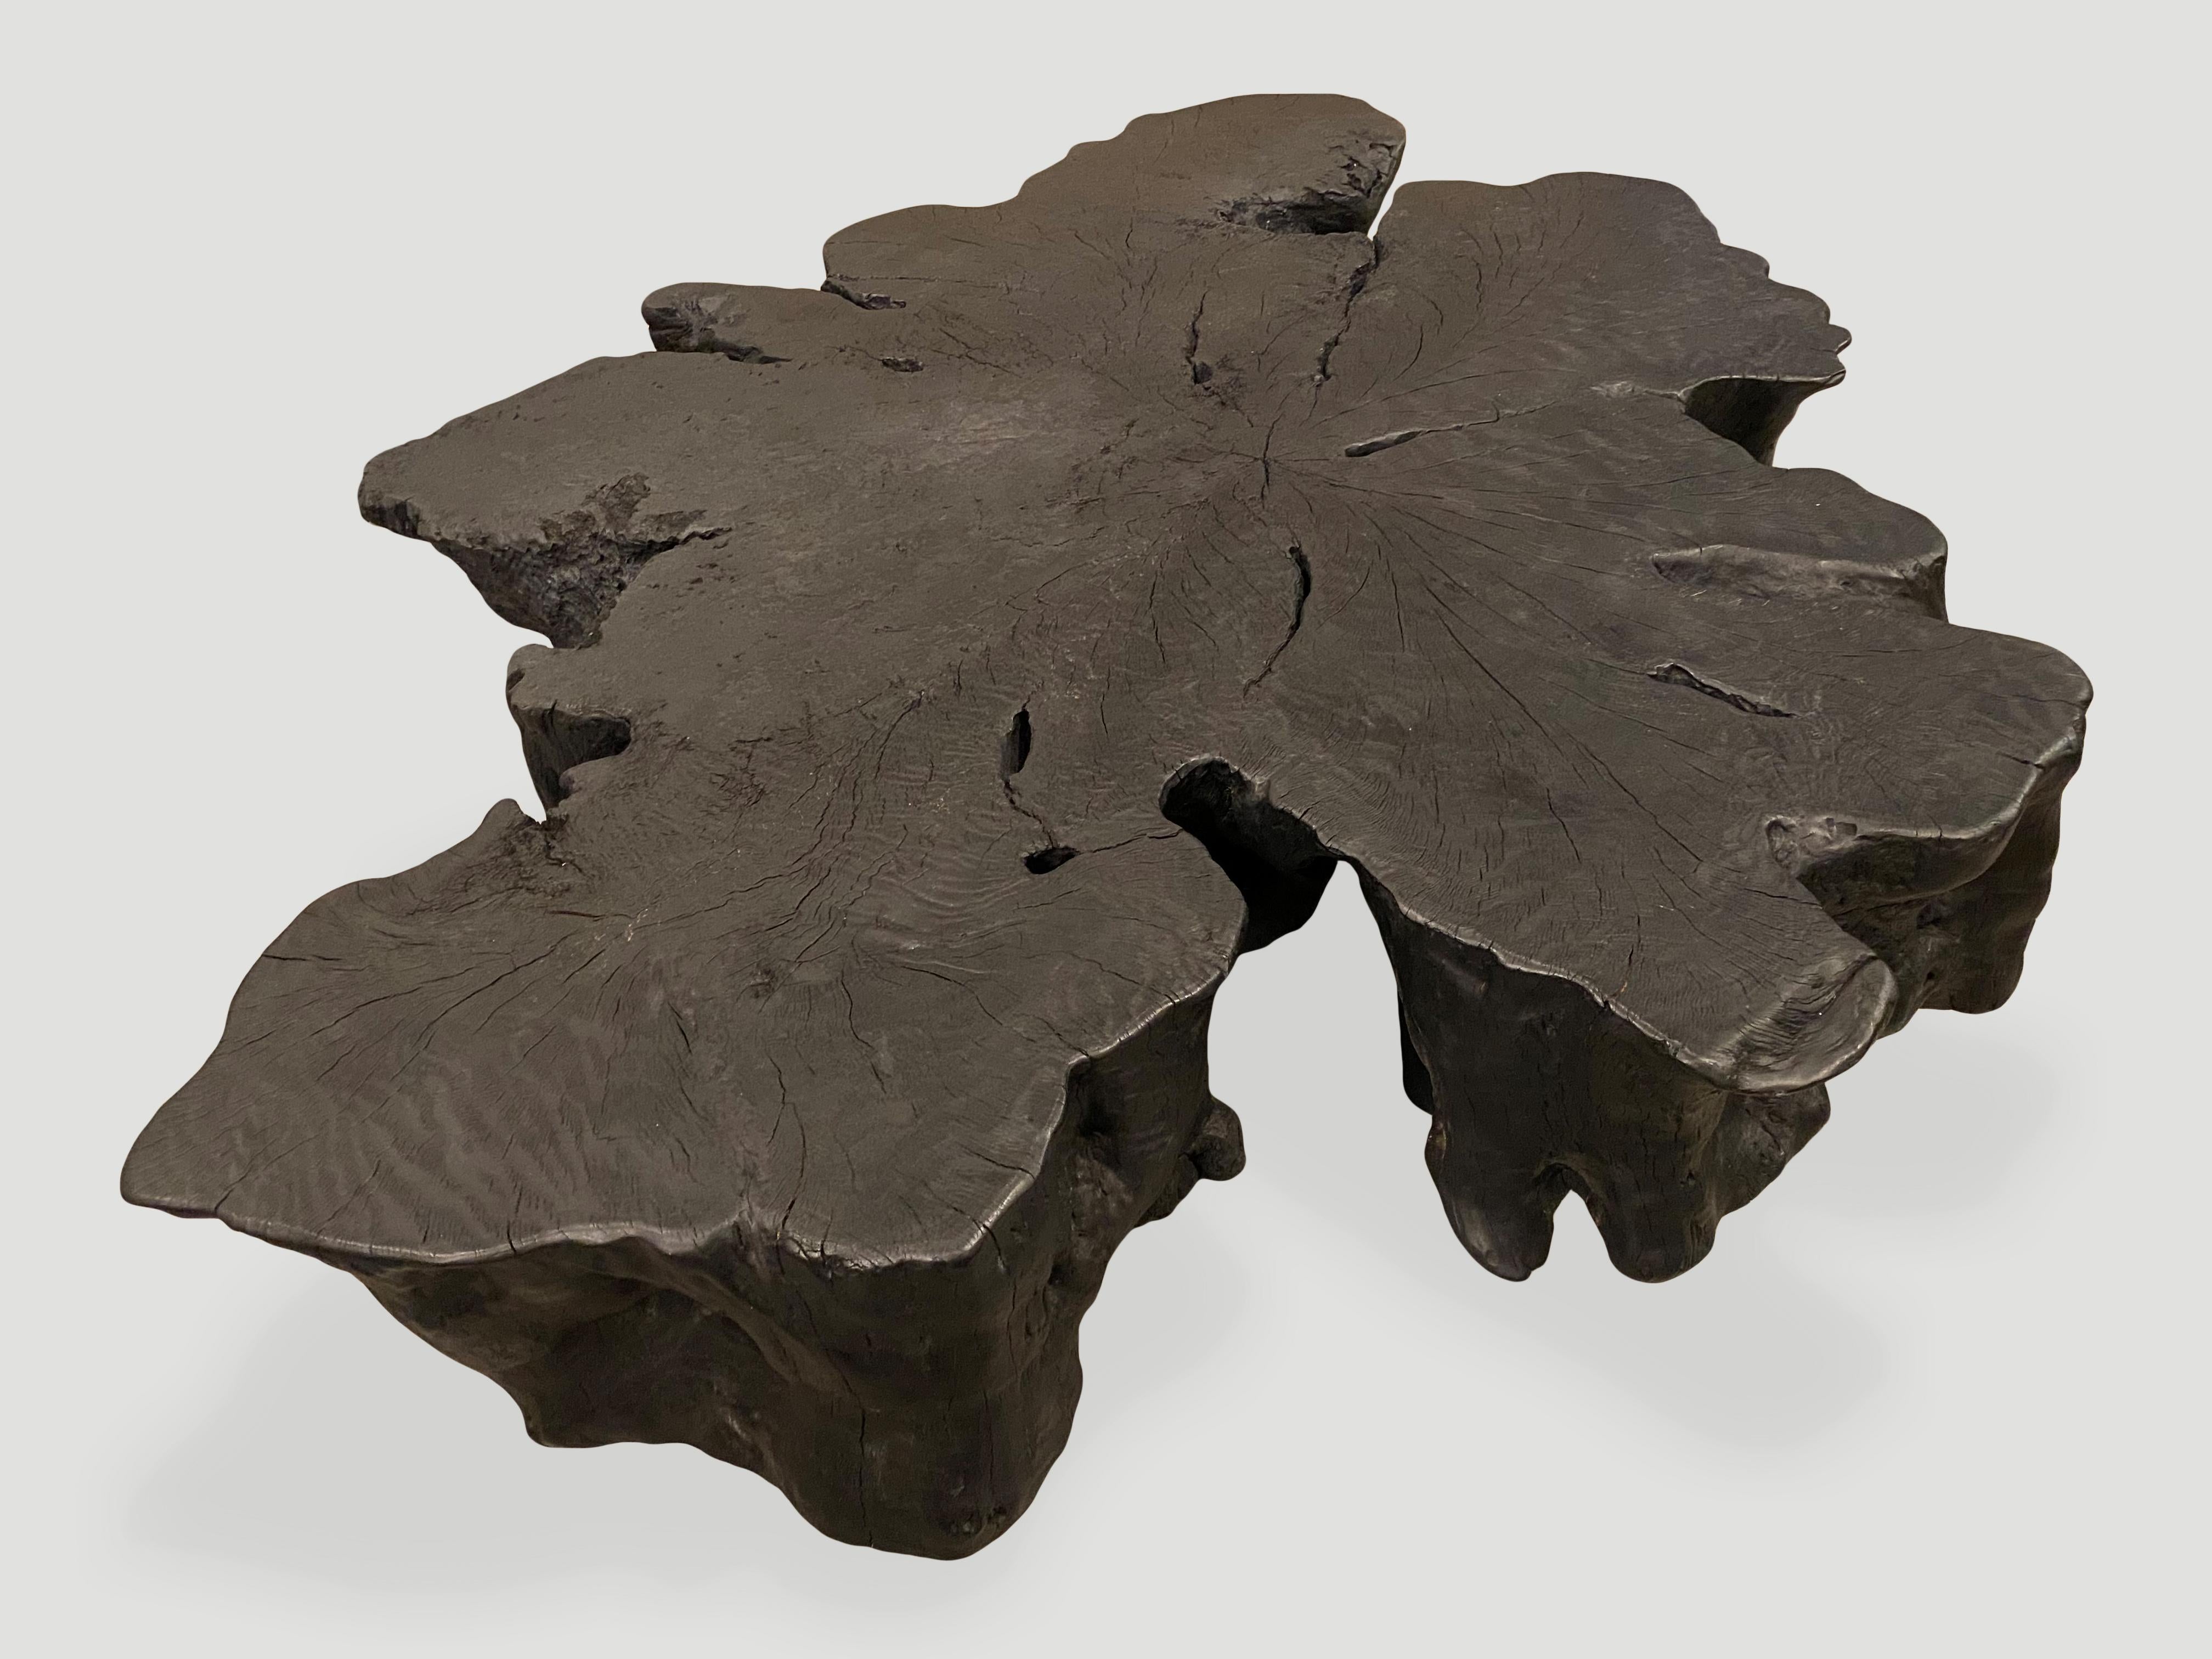 Contemporary Andrianna Shamaris Amorphous Charred Coffee Table For Sale